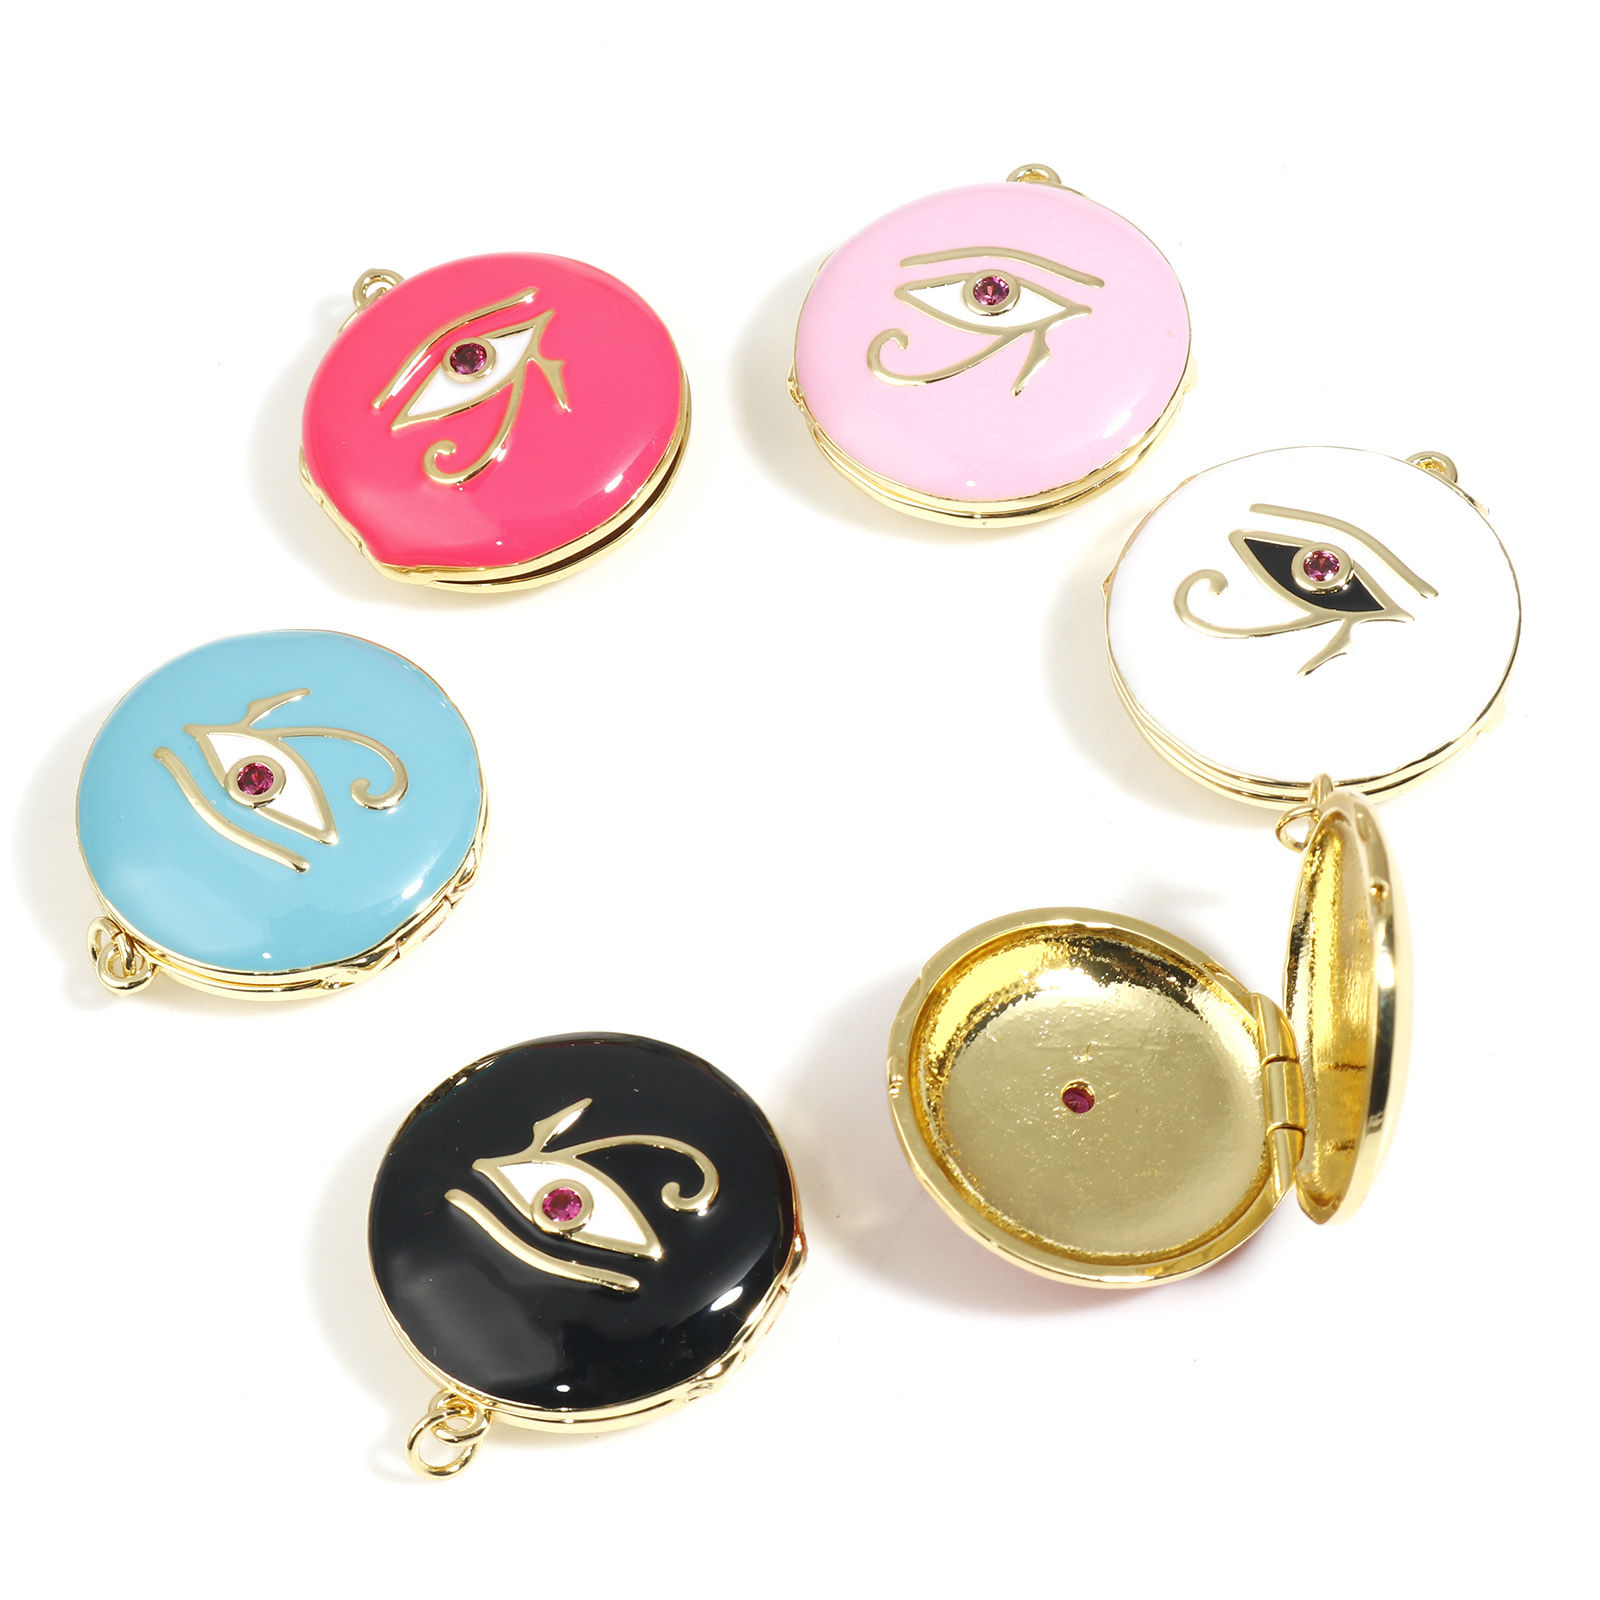 Picture of Copper Religious Picture Photo Locket Frame Pendents Gold Plated Multicolor Round The Eye Of Horus Enamel Red Rhinestone 1 Piece